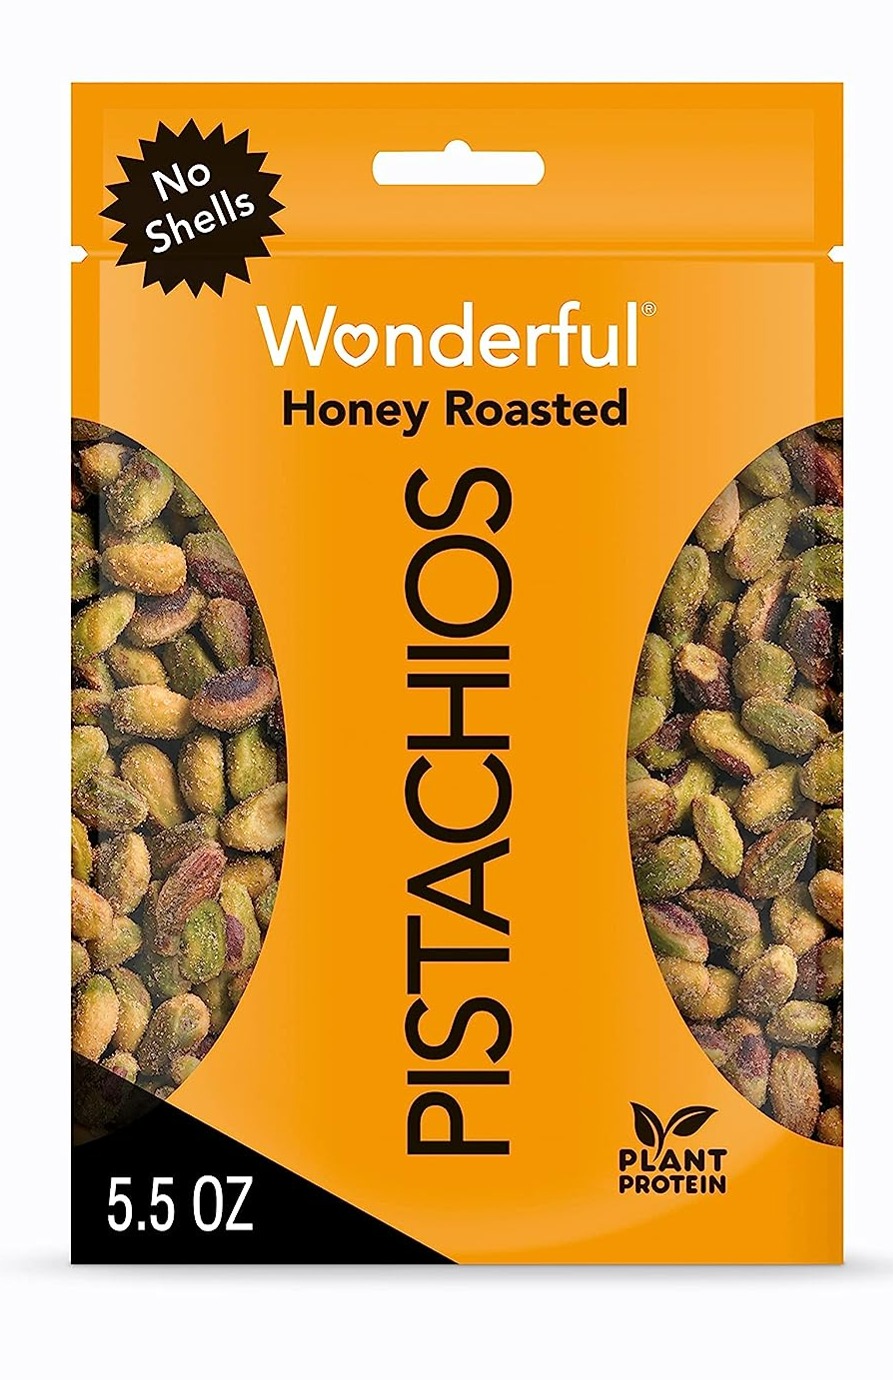 5.5-Oz Wonderful Honey Roasted Pistachios (No Shells) $3.73 w/ S&S + Free Shipping w/ Prime or on orders over $35